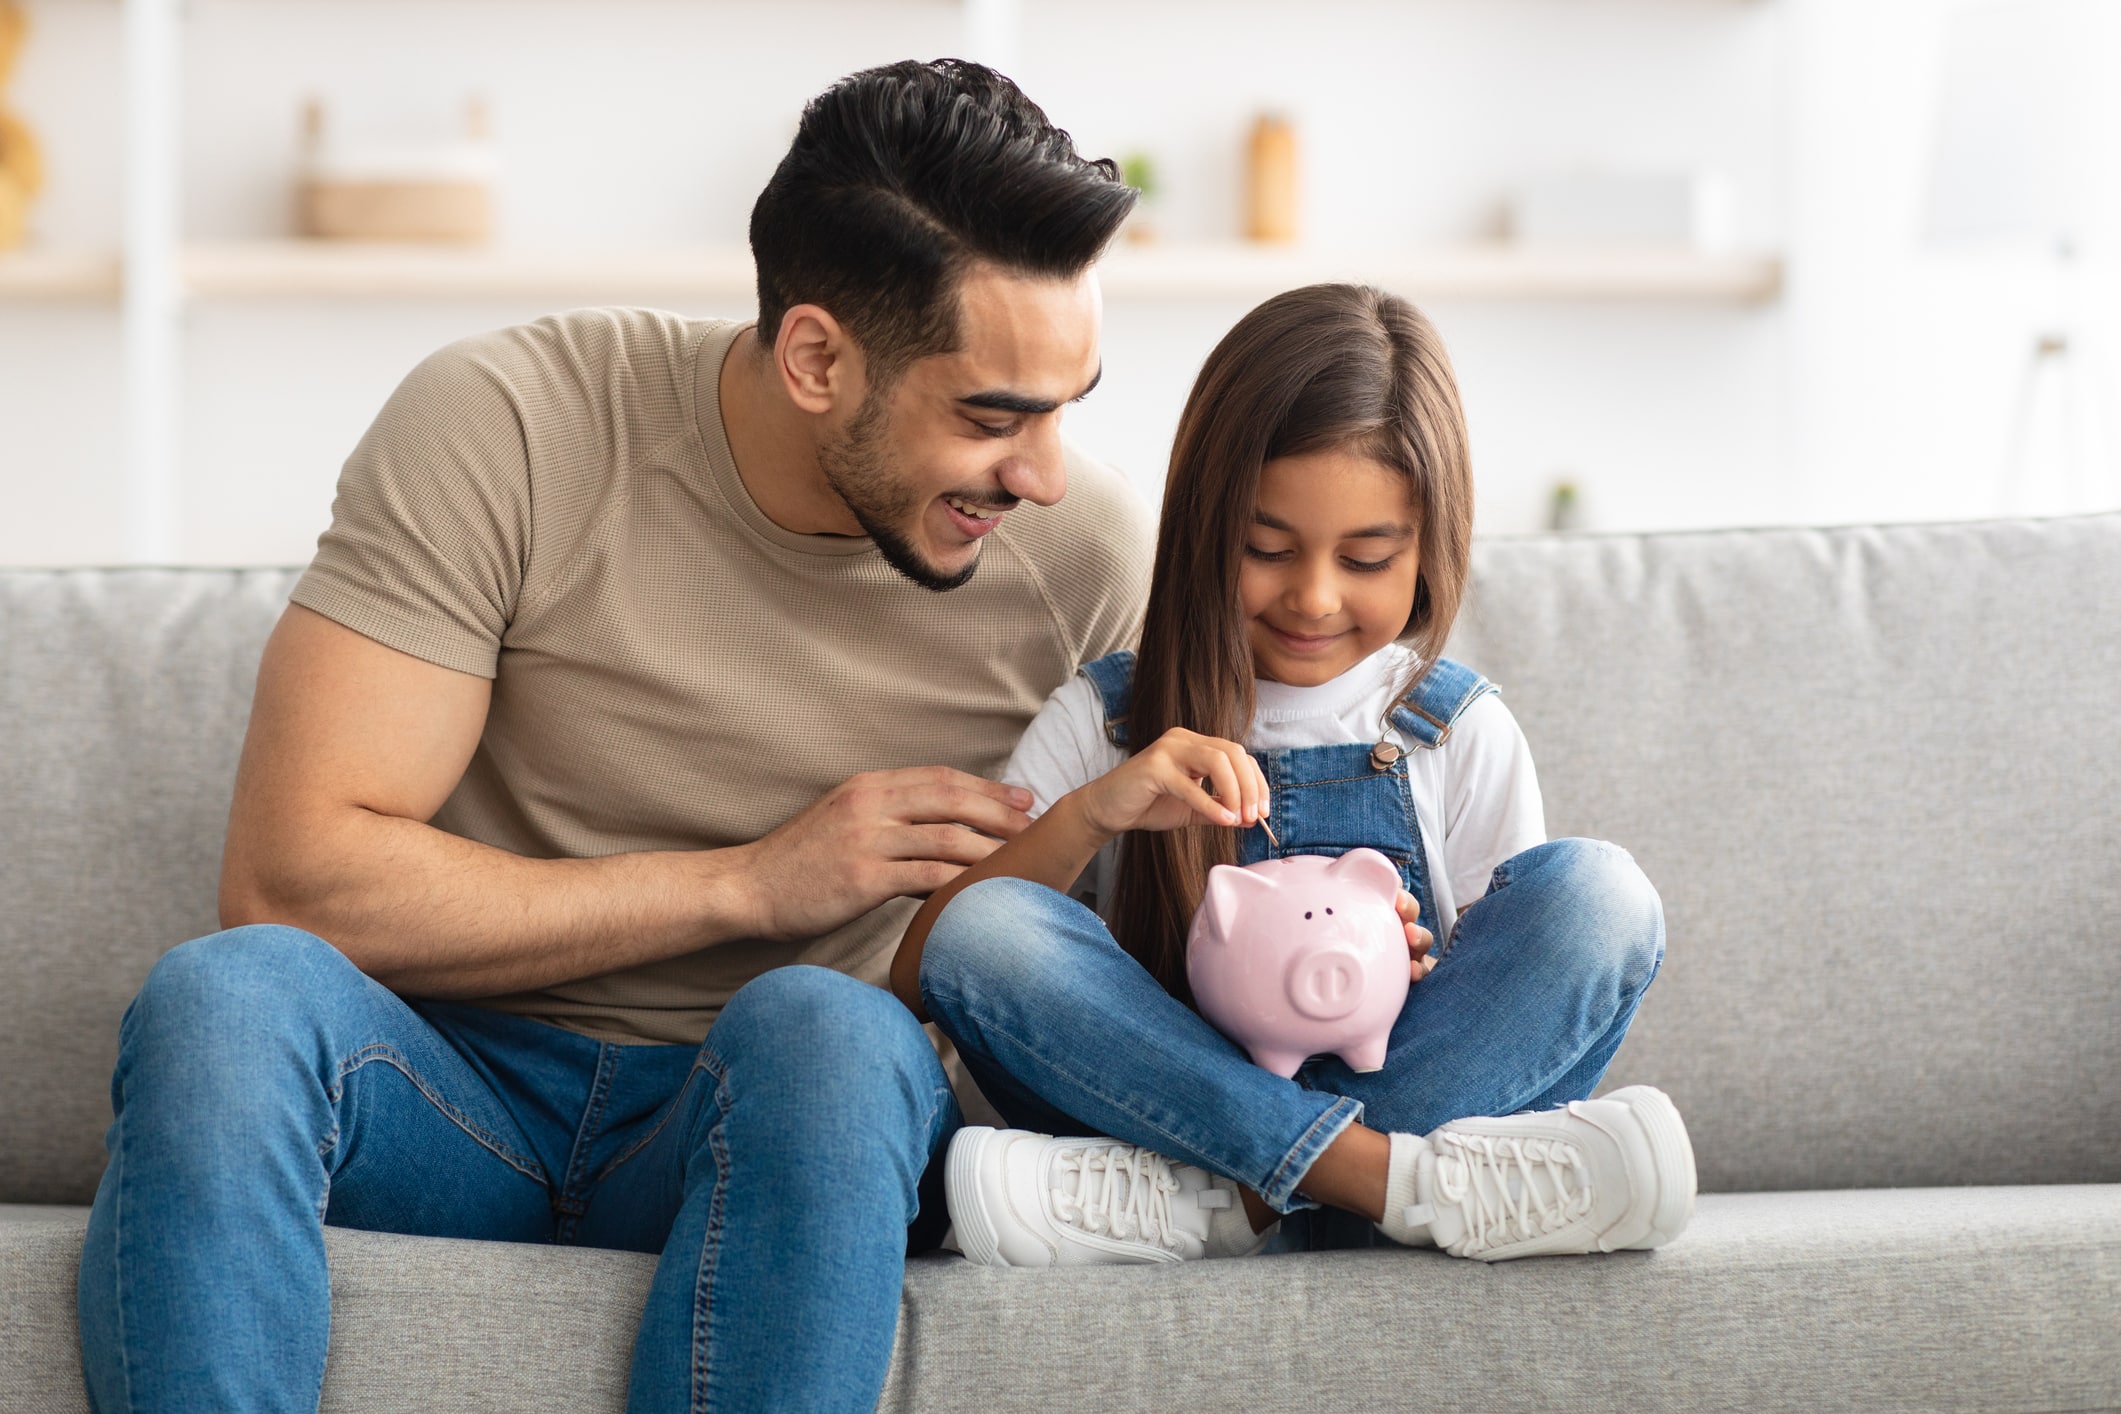 money lessons to teach your kids. Financial Education For Children Concept. Portrait of cute smiling little girl putting coin in pink piggy bank, sitting with dad on the couch at home, man teaching his daughter how to invest.